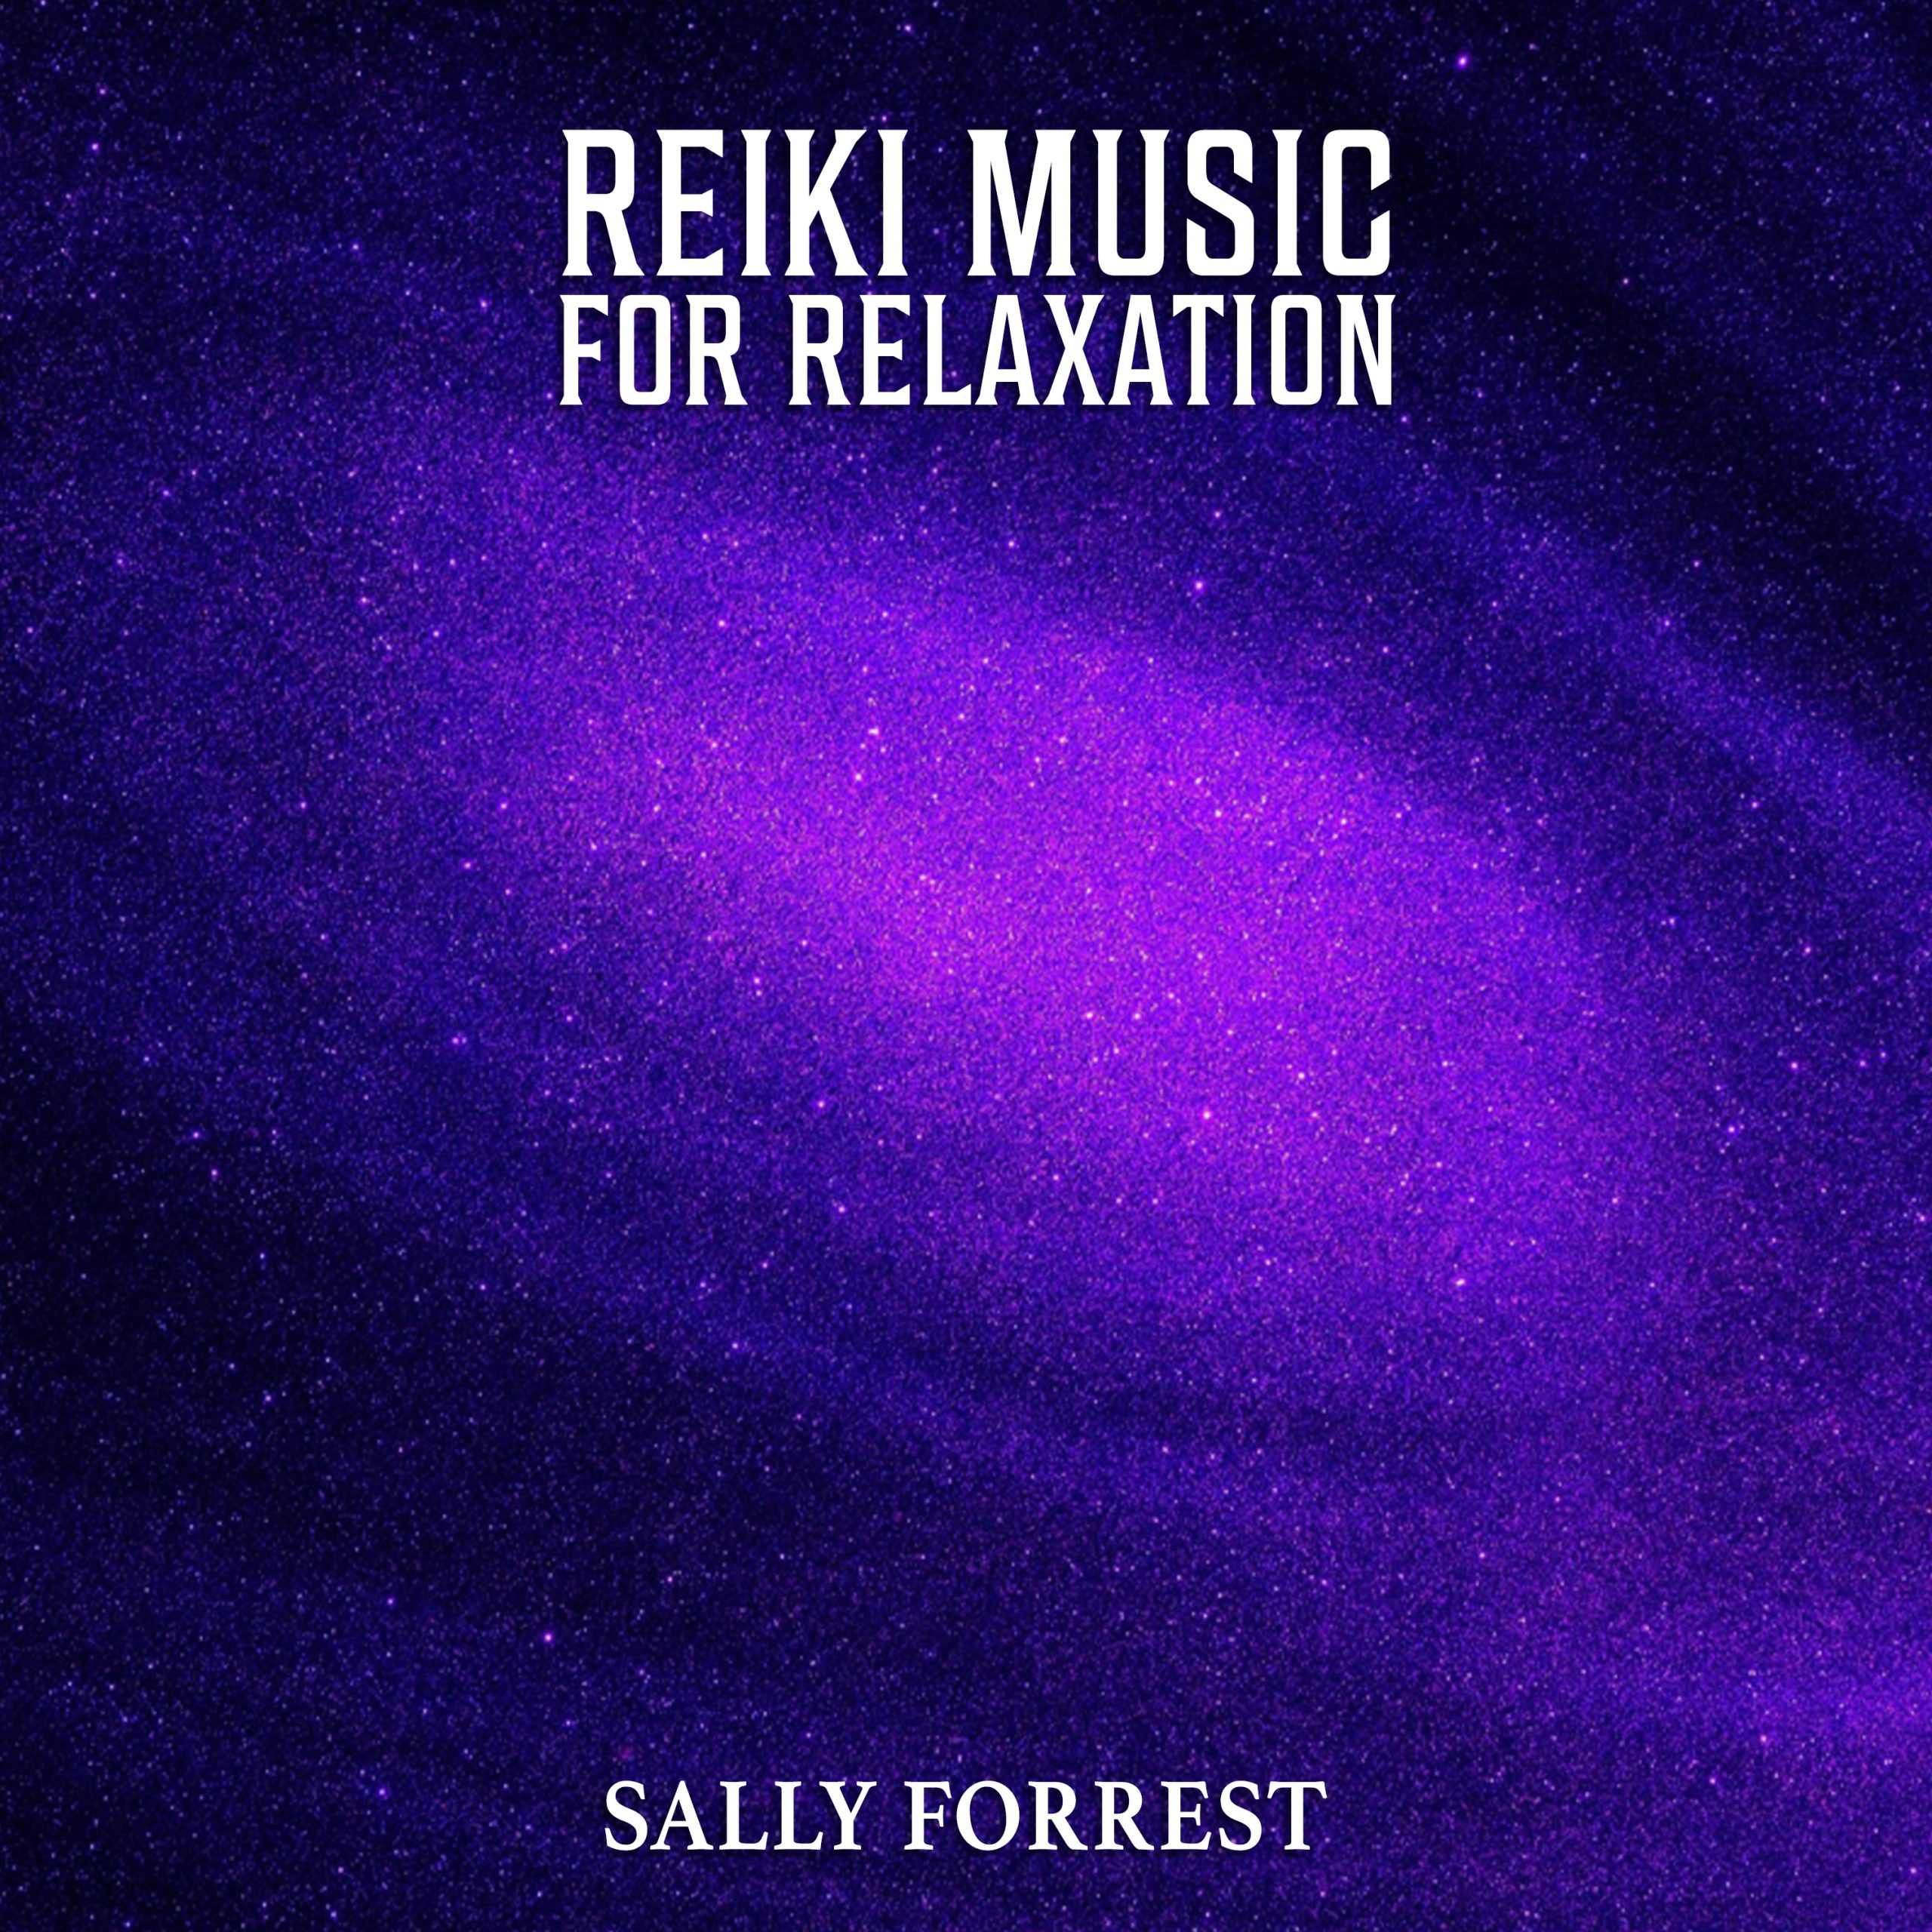 Reiki Music for Relaxation